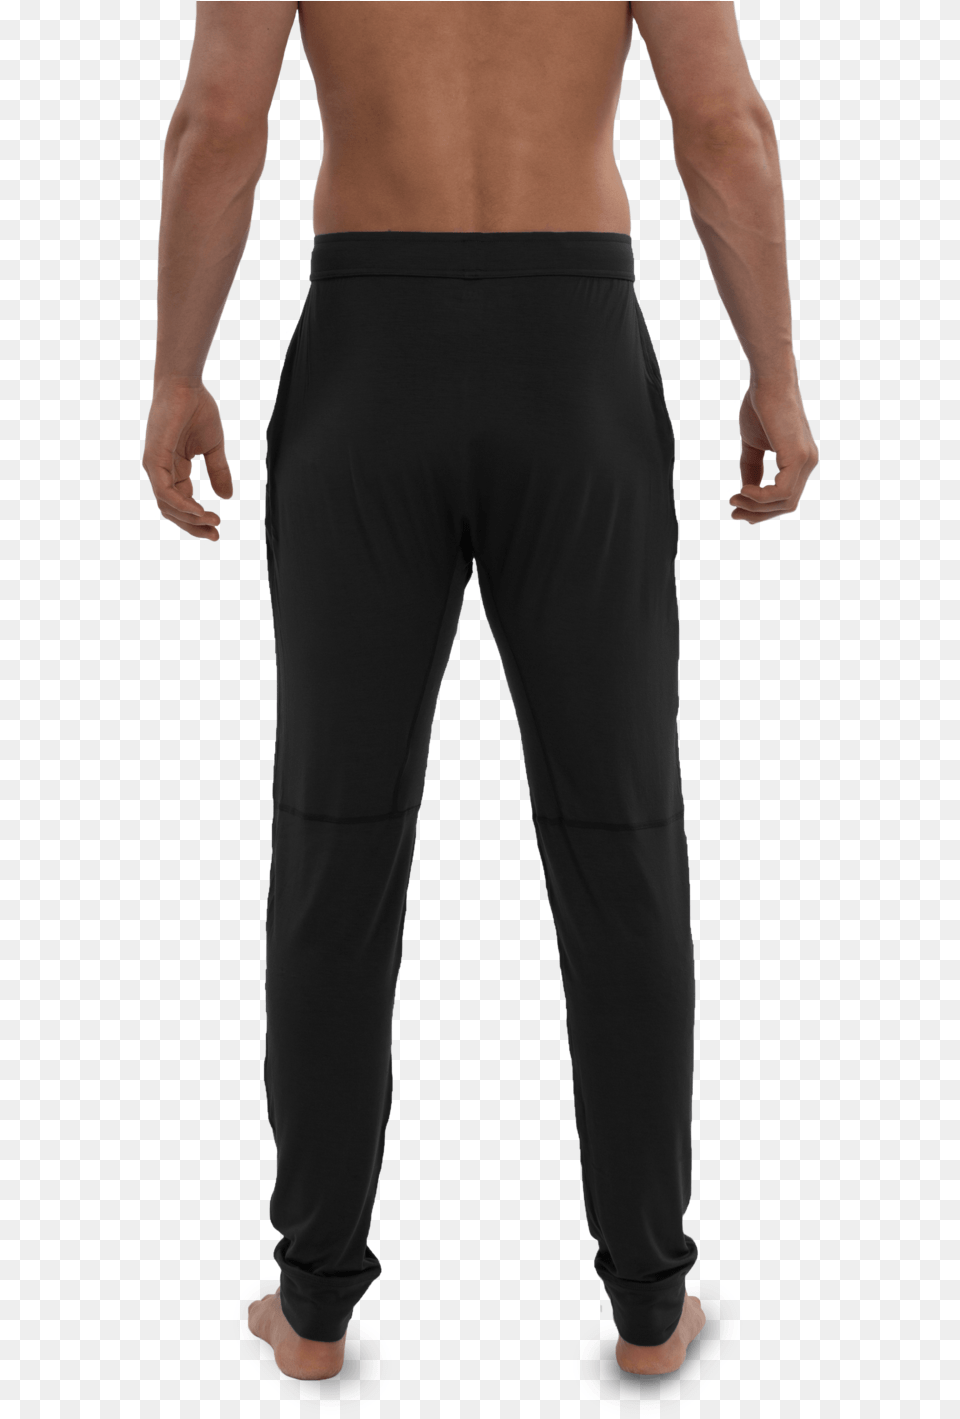 Snooze Pant Pocket, Clothing, Pants, Jeans Png